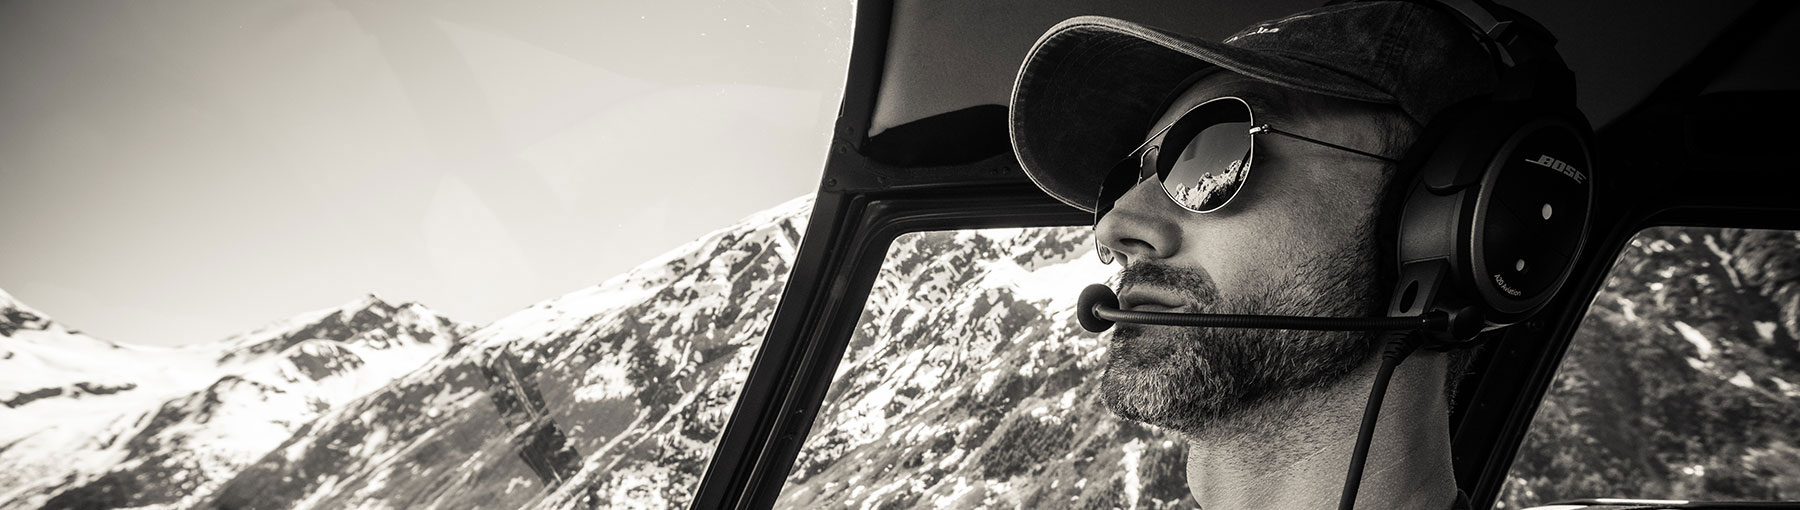 Helicopter pilot in the cockpit flying by snowy Alaskan mountains.